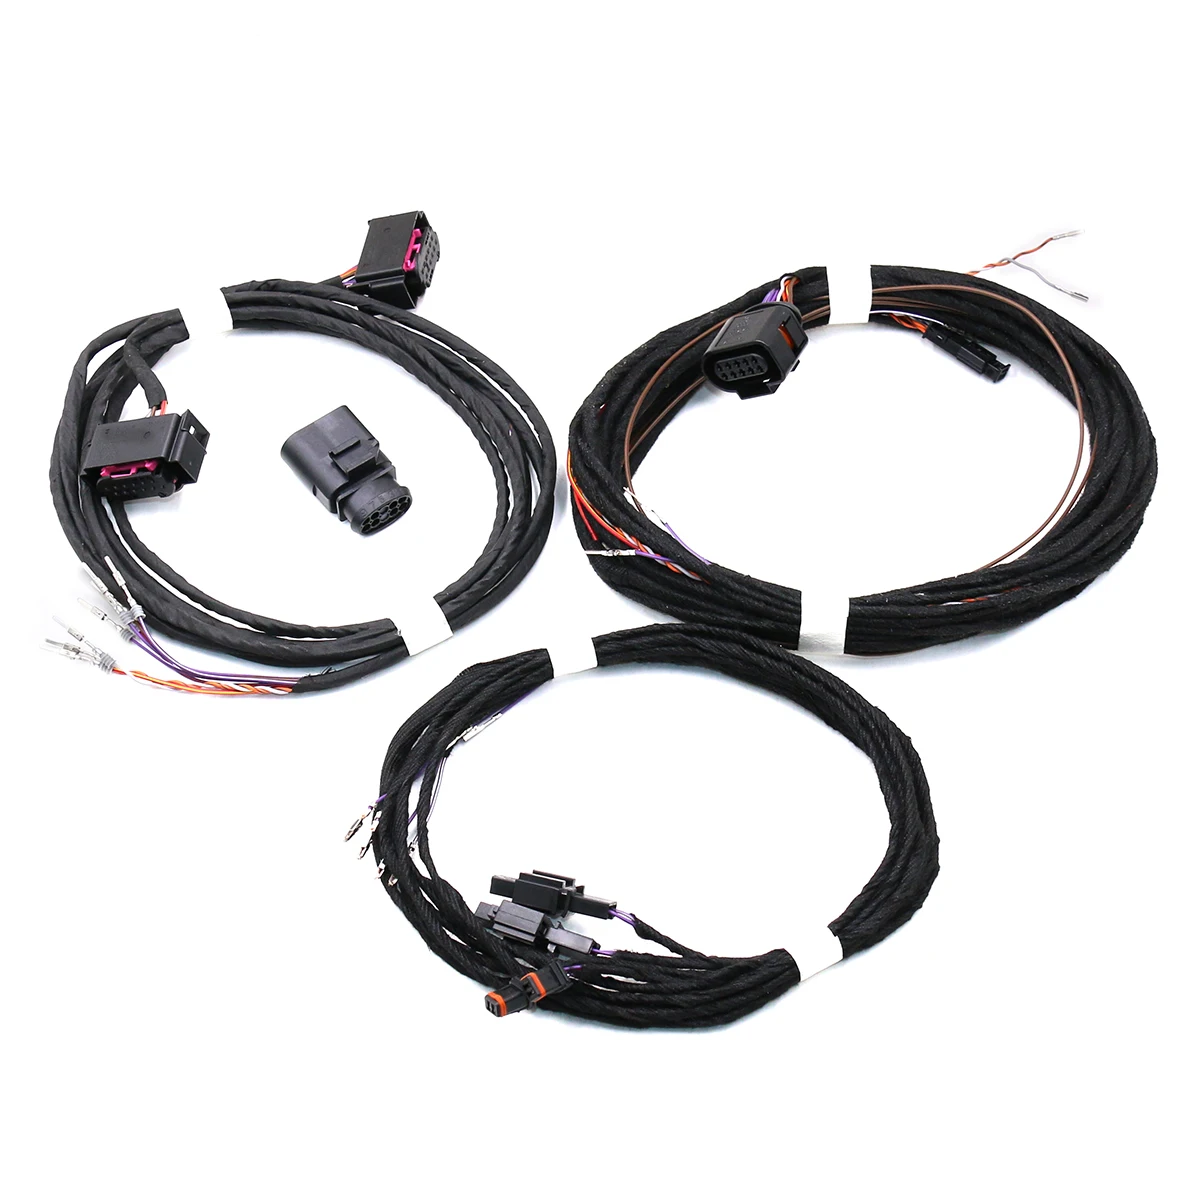 FOR Audi NEW TT Side Assist Lane Change Blind spot assist Wire Cable Harness